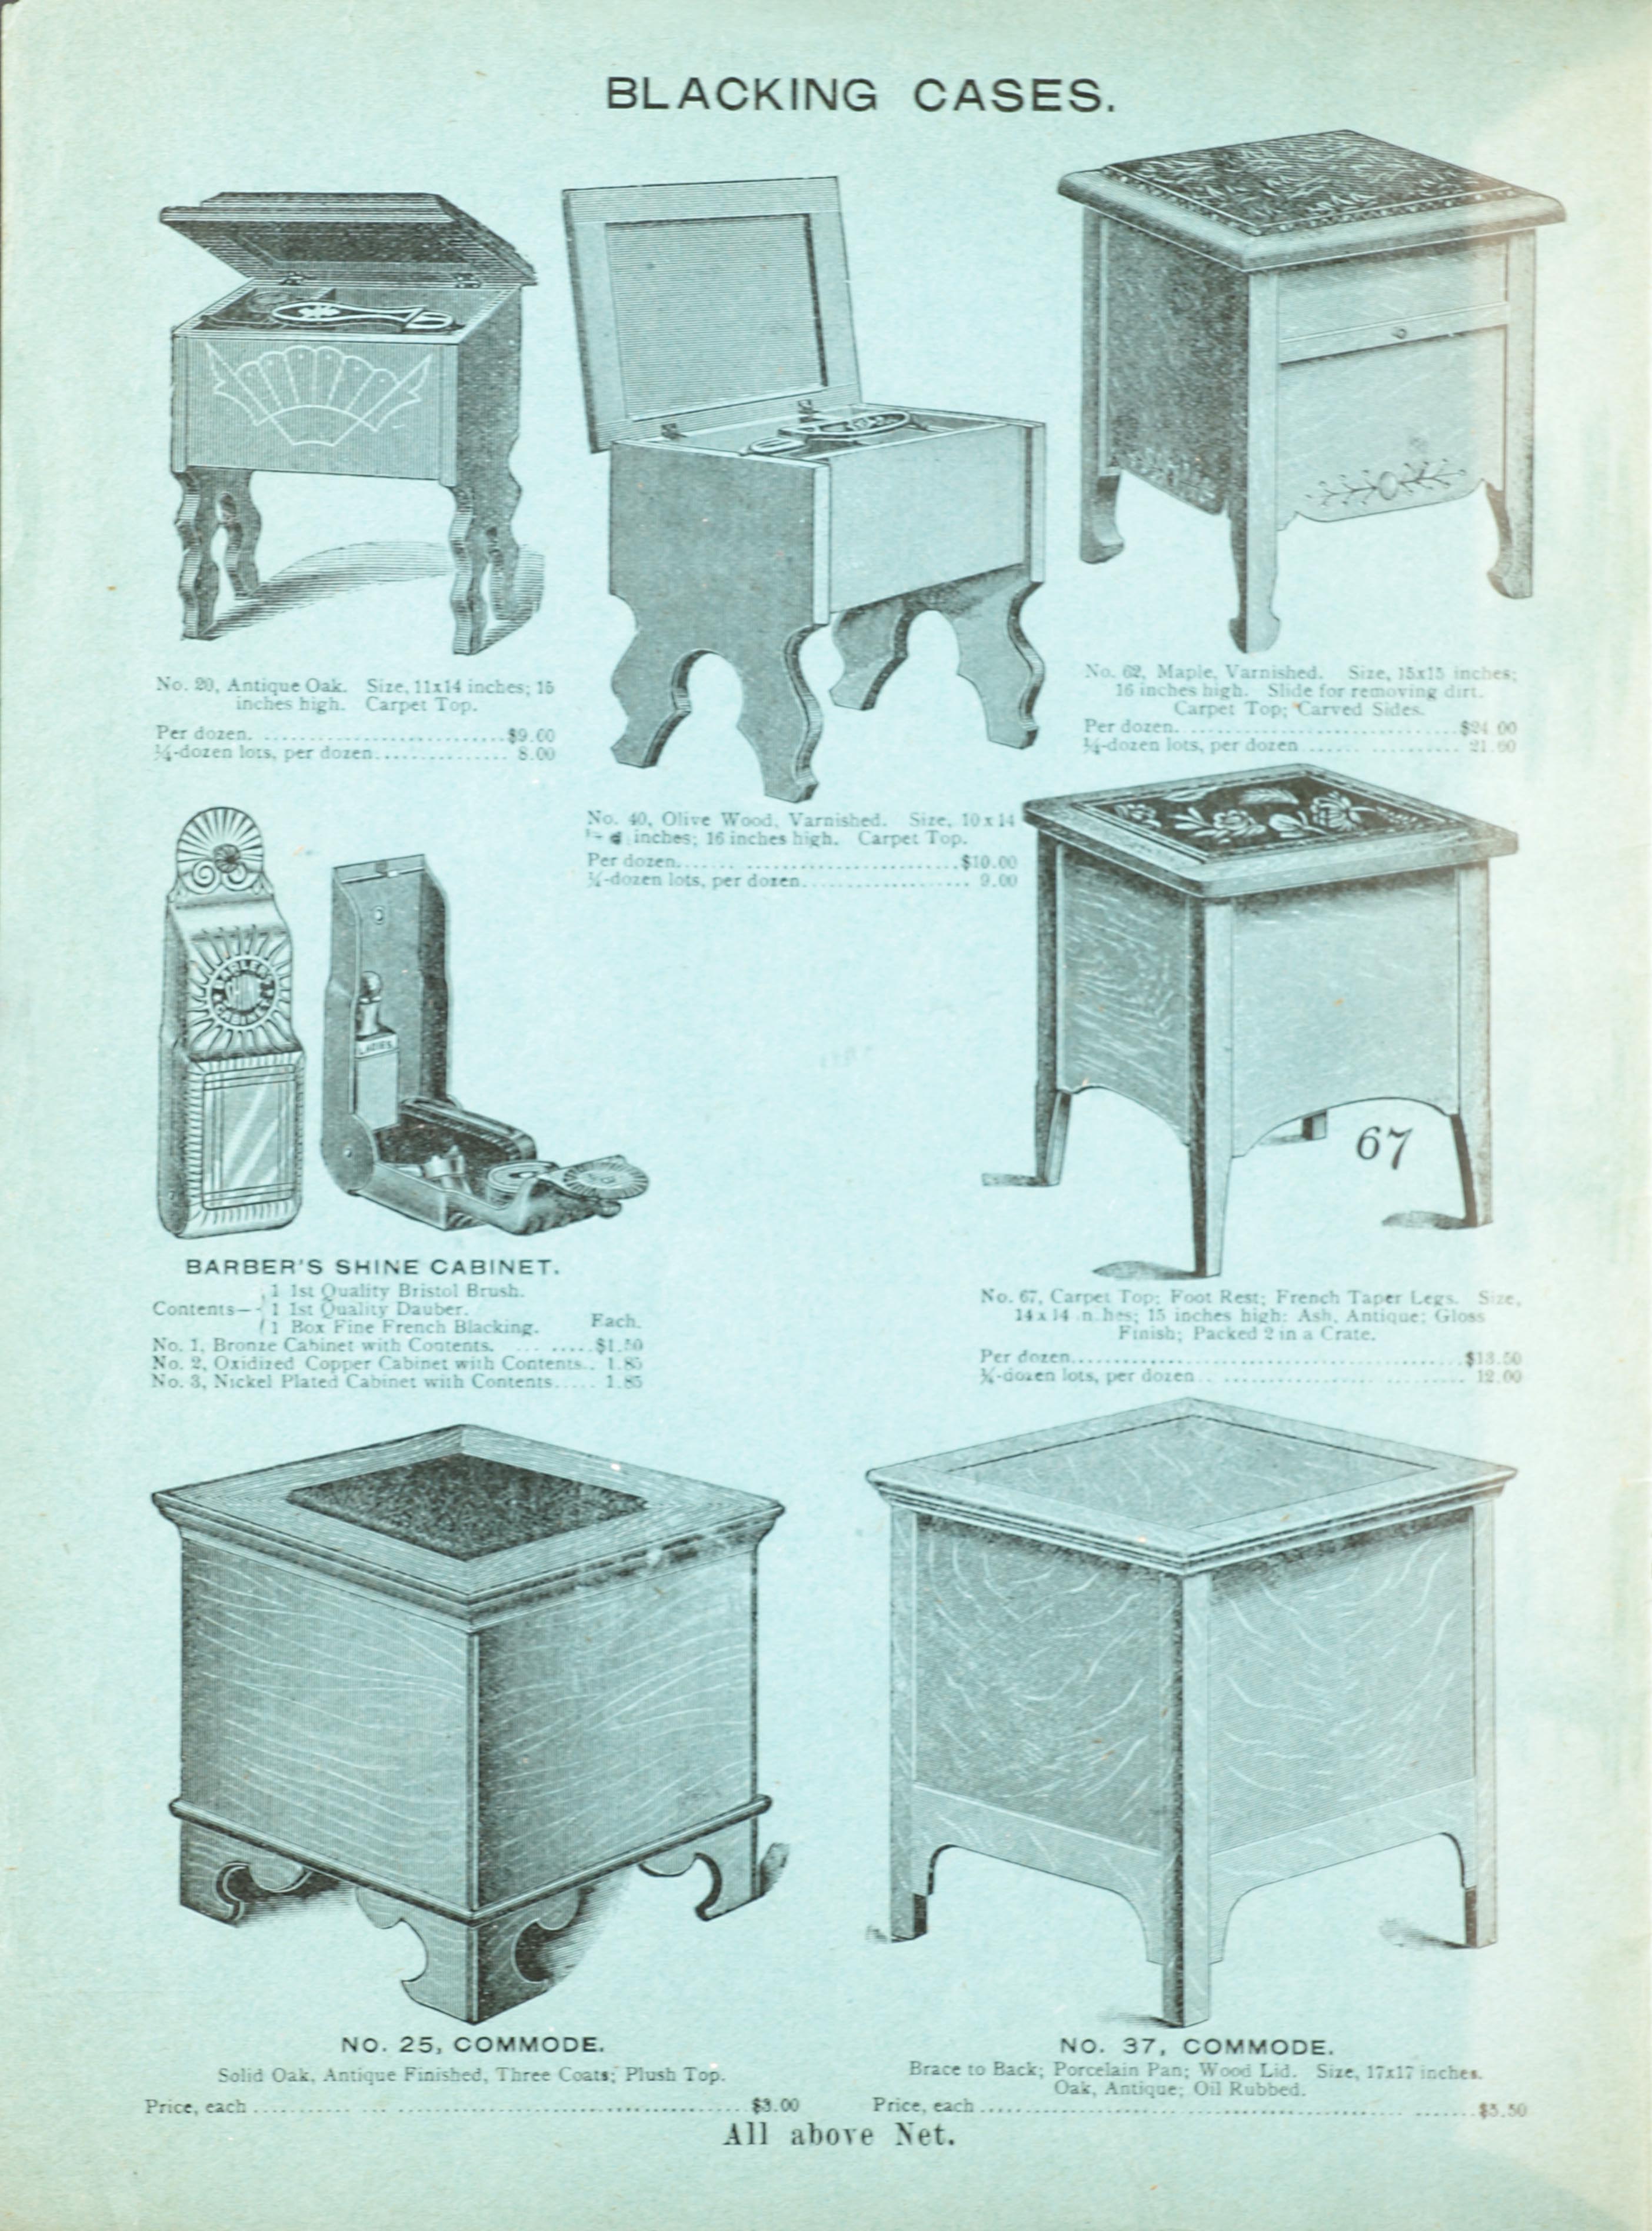 John V. Farwell Iron Bed Catalog, Chicago 1895- Page 1